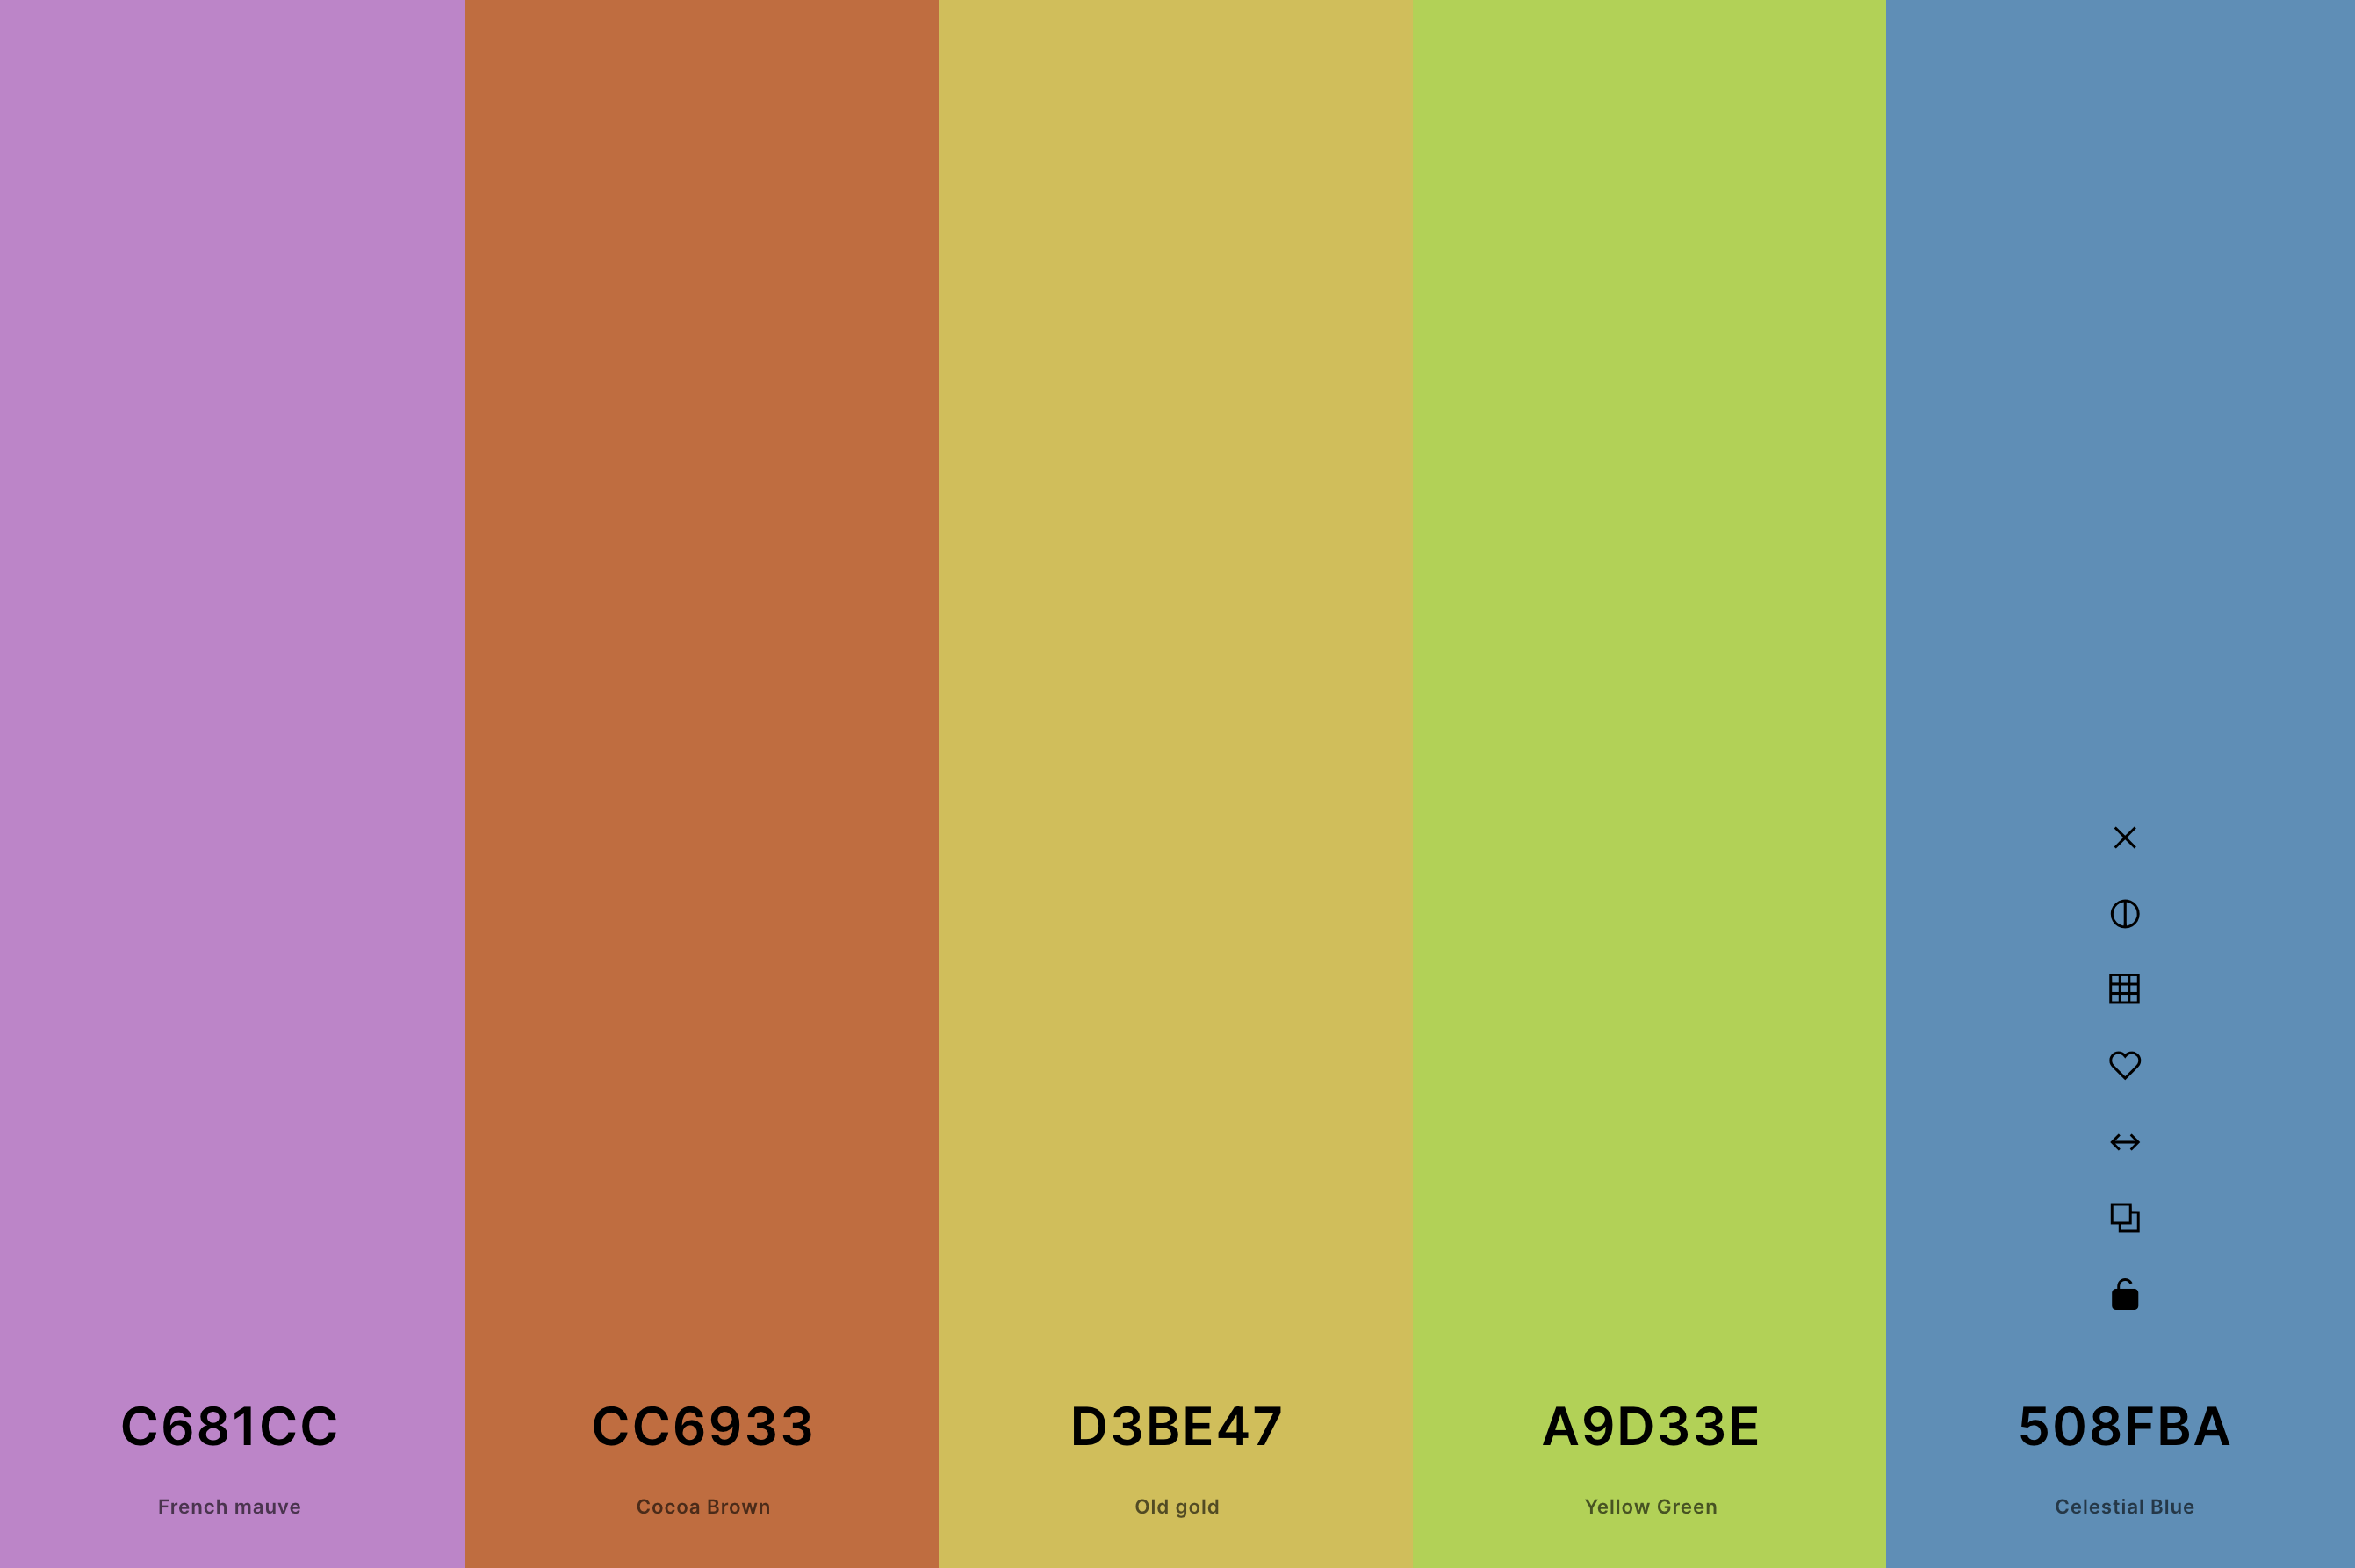 14. 60's Retro Color Palette Color Palette with French Mauve (Hex #C681CC) + Cocoa Brown (Hex #CC6933) + Old Gold (Hex #D3BE47) + Yellow Green (Hex #A9D33E) + Celestial Blue (Hex #508FBA) Color Palette with Hex Codes